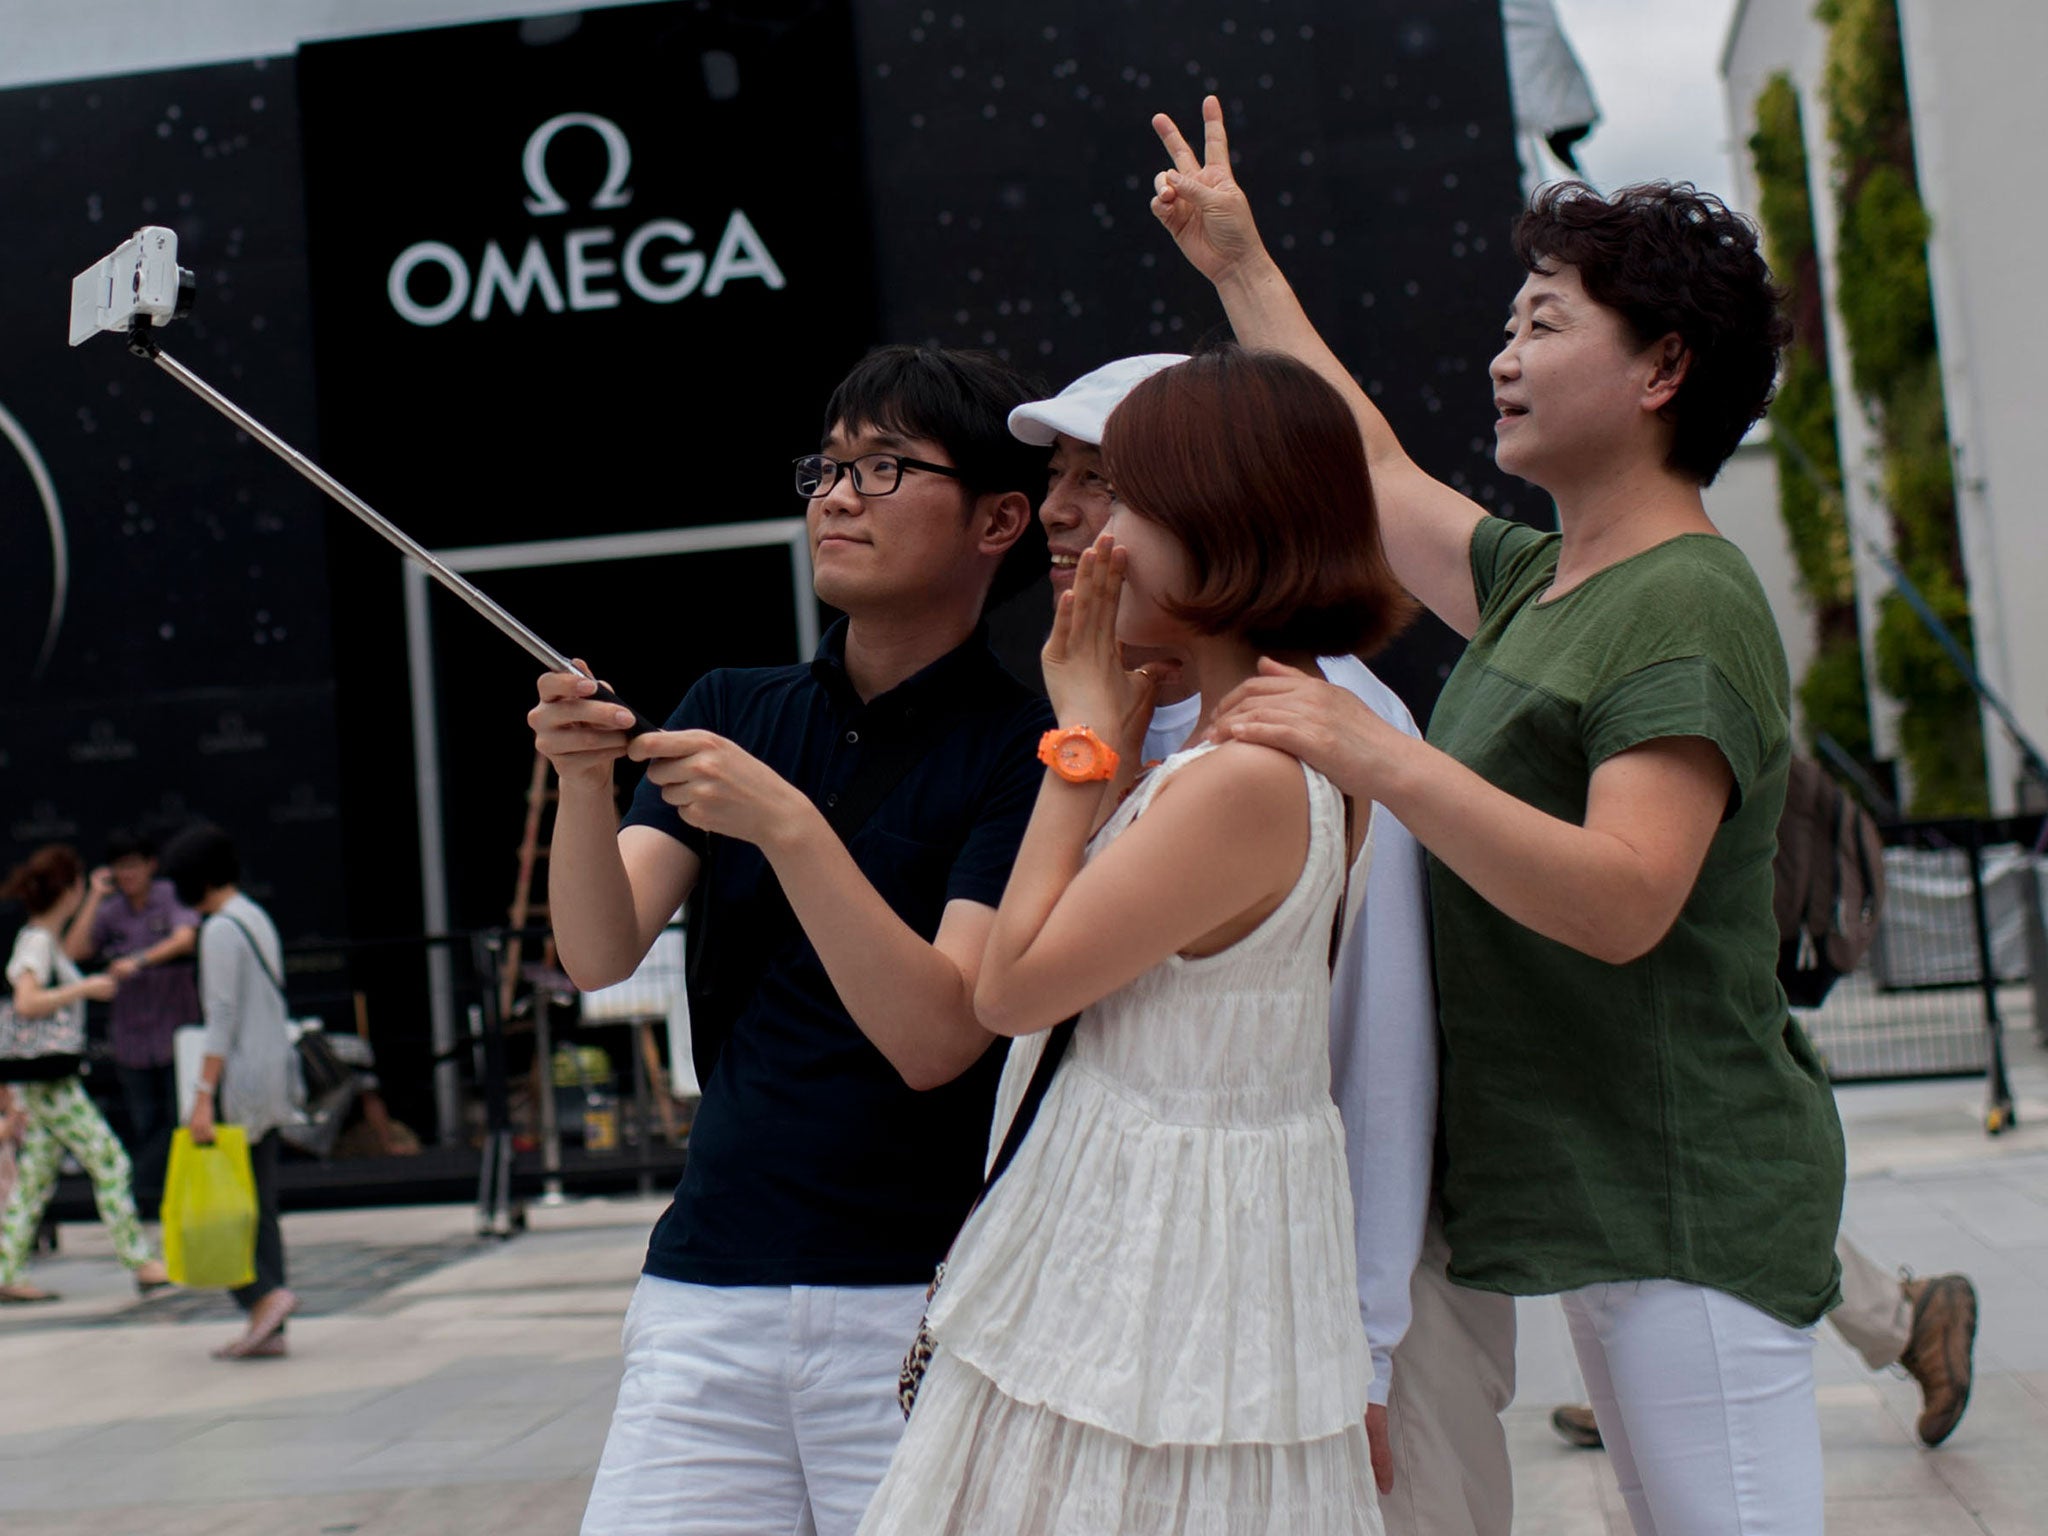 Tourists take a picture with a selfie stick at Siam on August 29, 2014 in Bangkok, Thailand.